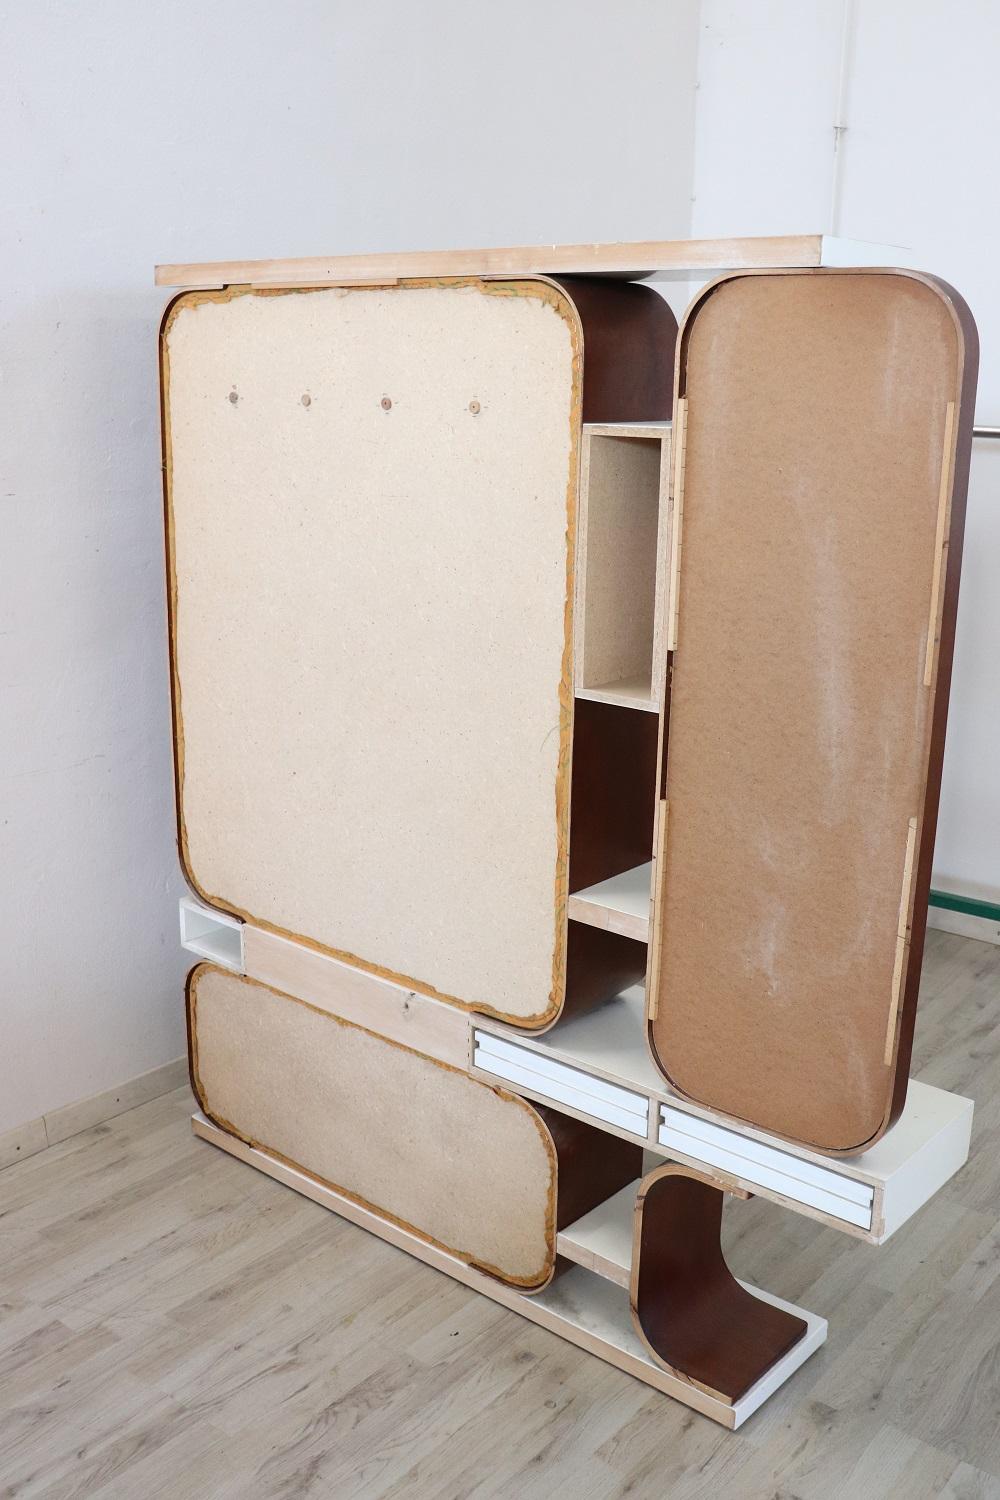 20th Century Italian Design Cabinet With Clothes Hangers, 1960s For Sale 5